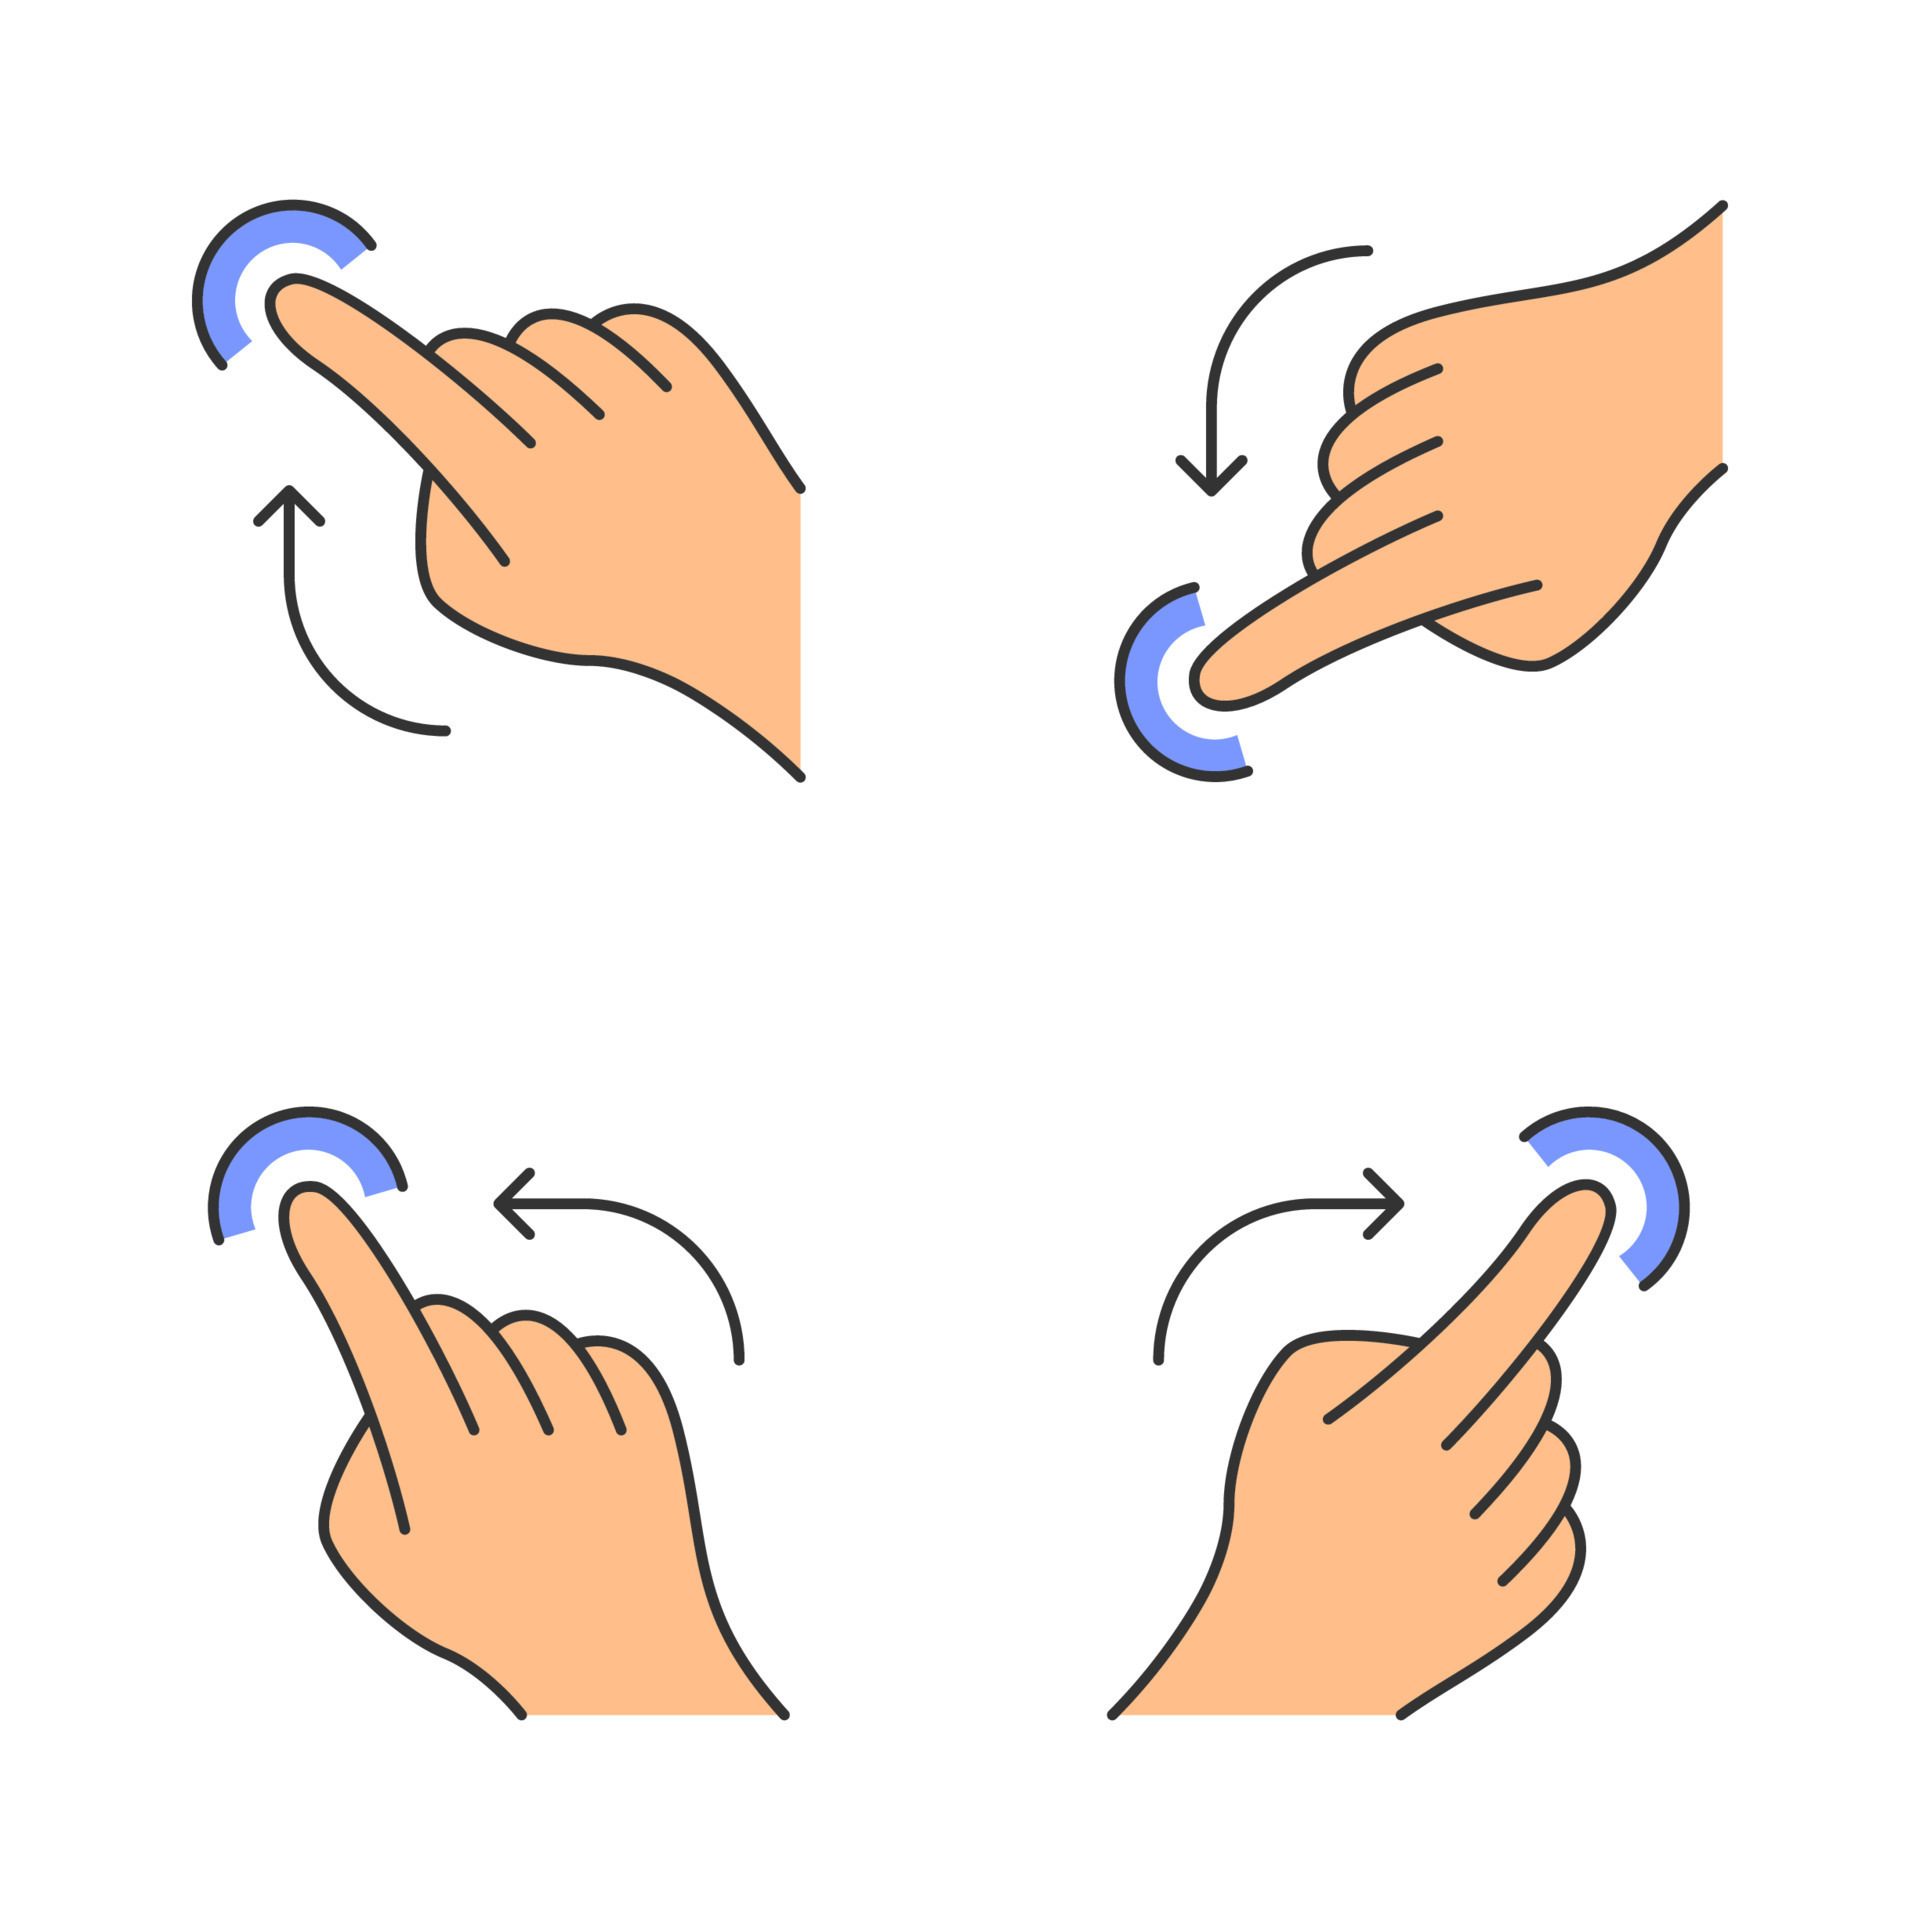 https://static.vecteezy.com/system/resources/previews/007/693/890/original/touchscreen-gestures-color-icons-set-flick-left-flick-right-gesturing-flick-up-and-flick-down-touch-gesture-human-fingers-isolated-illustrations-vector.jpg